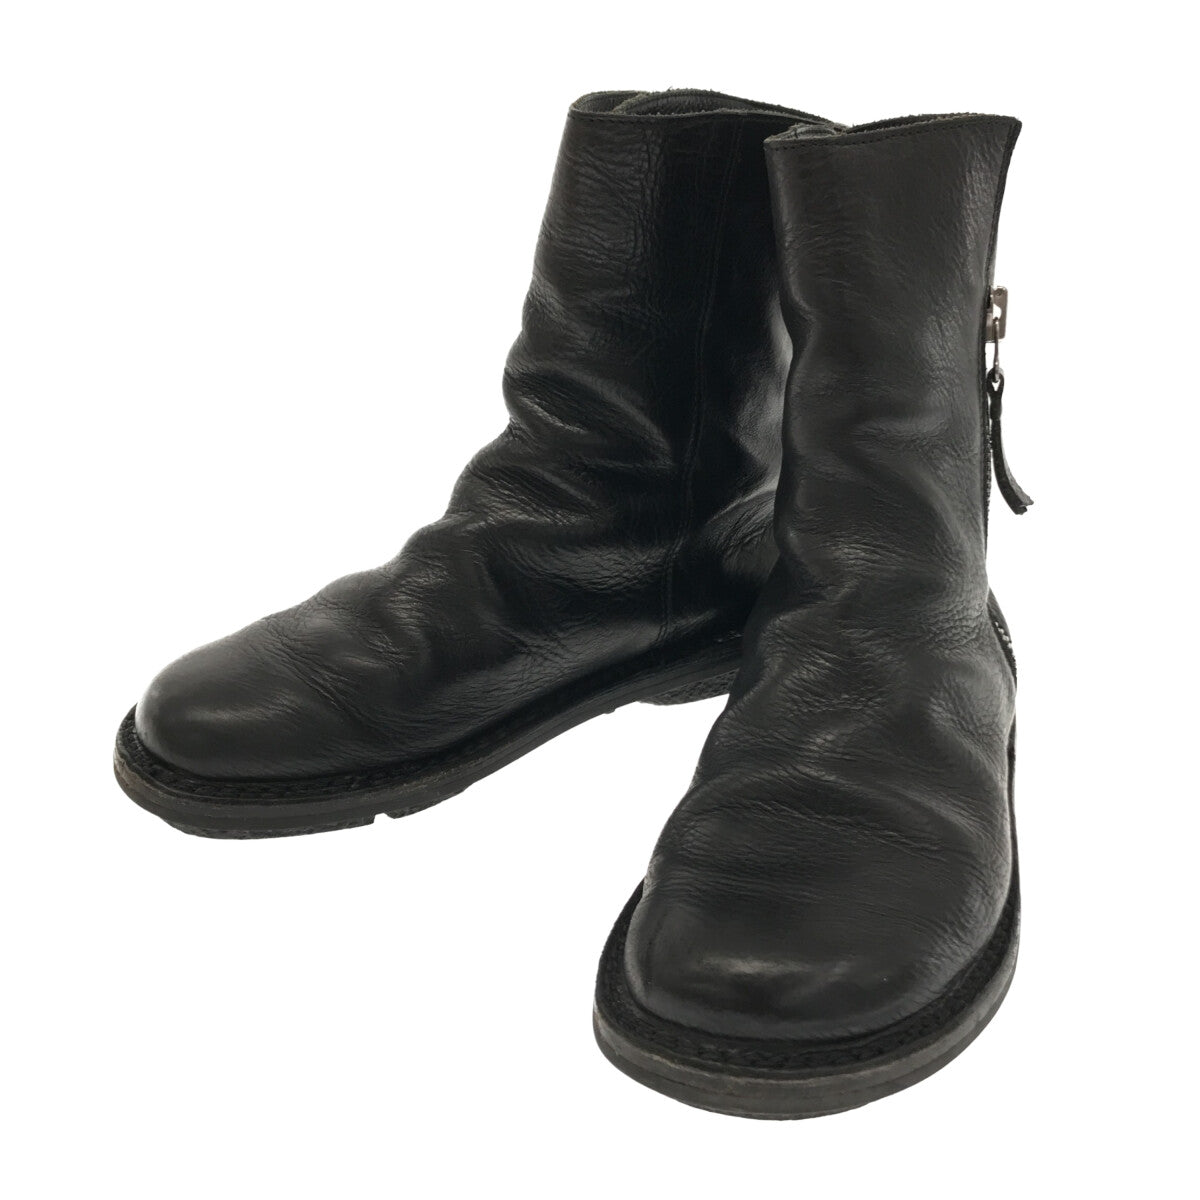 trippen leather boots トリッペン レザーブーツ